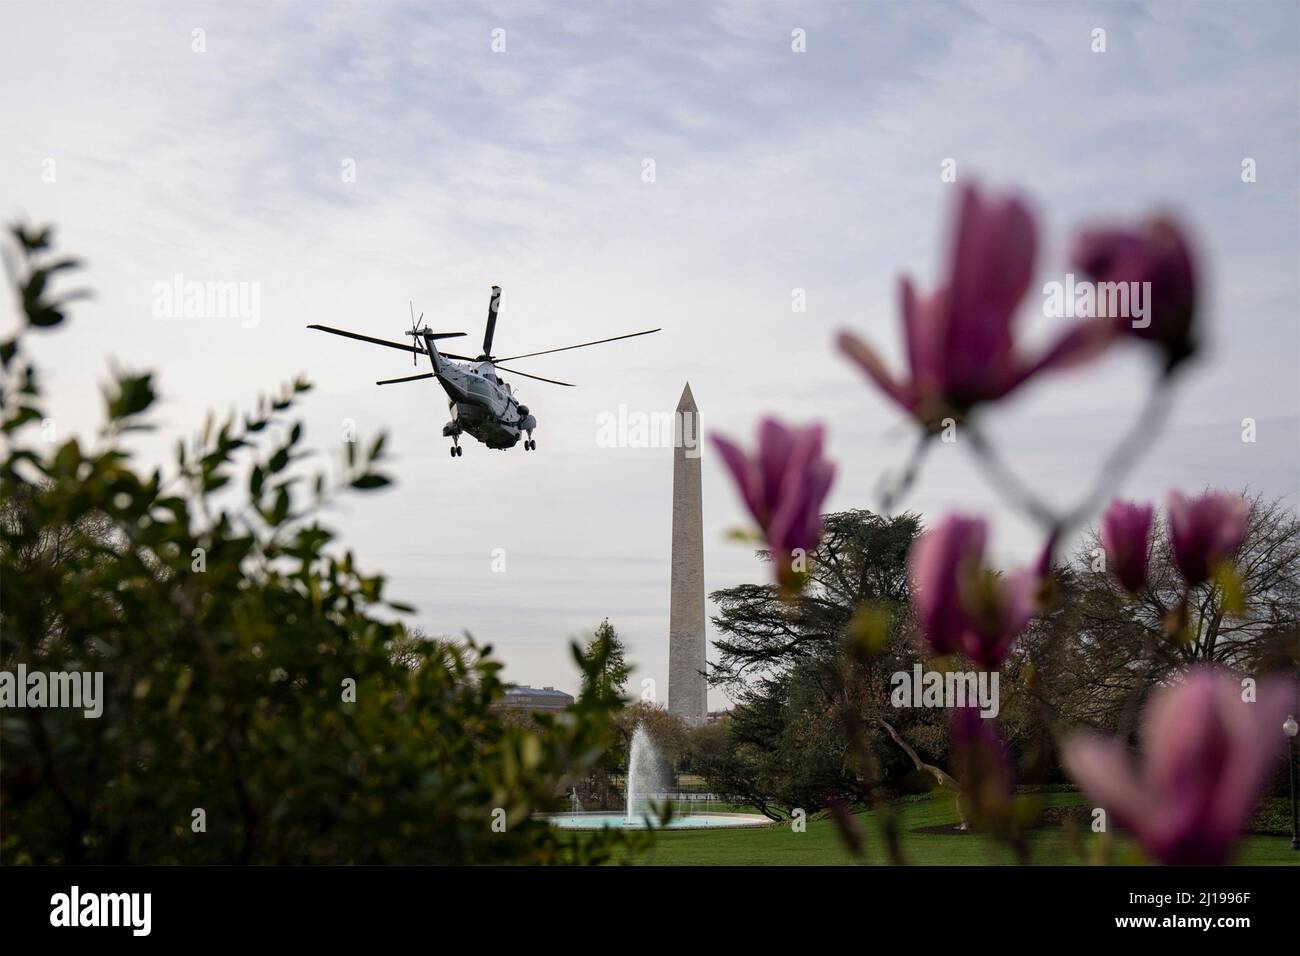 Washington, United States Of America. 23rd Mar, 2022. Washington, United States of America. 23 March, 2022. Marine One helicopter carrying U.S President Joe Biden departs from the South Lawn of the White House for a short trip to Andrews Air Force Base, March 23, 2022 in Washington, DC Biden is departing on a trip to Brussels and Poland to continue pushing for Ukraine support. Credit: Erin Scott/White House Photo/Alamy Live News Stock Photo